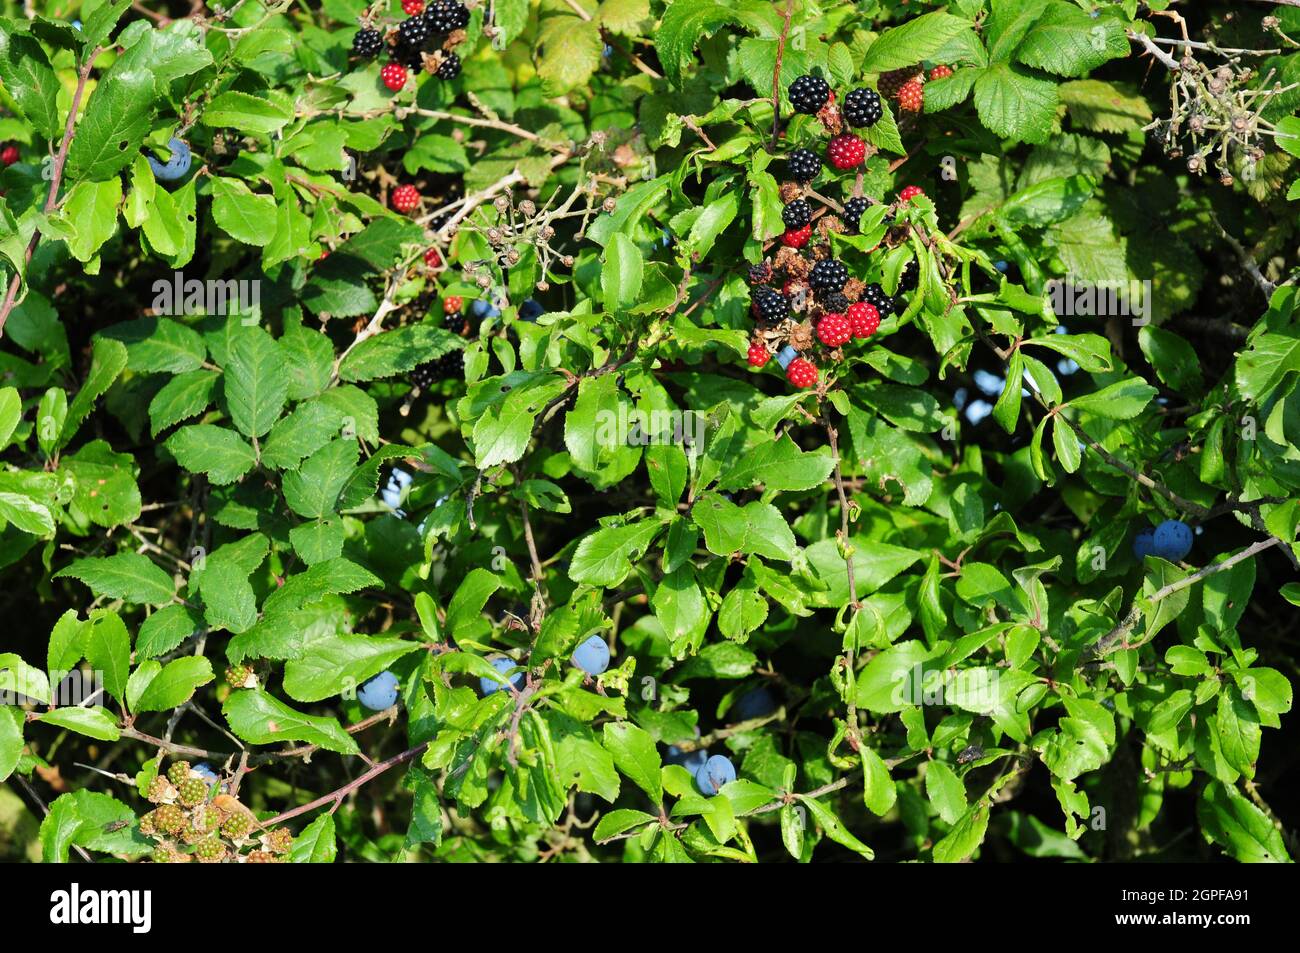 Ripening blackberries and sloes in a hedgerow. Stock Photo